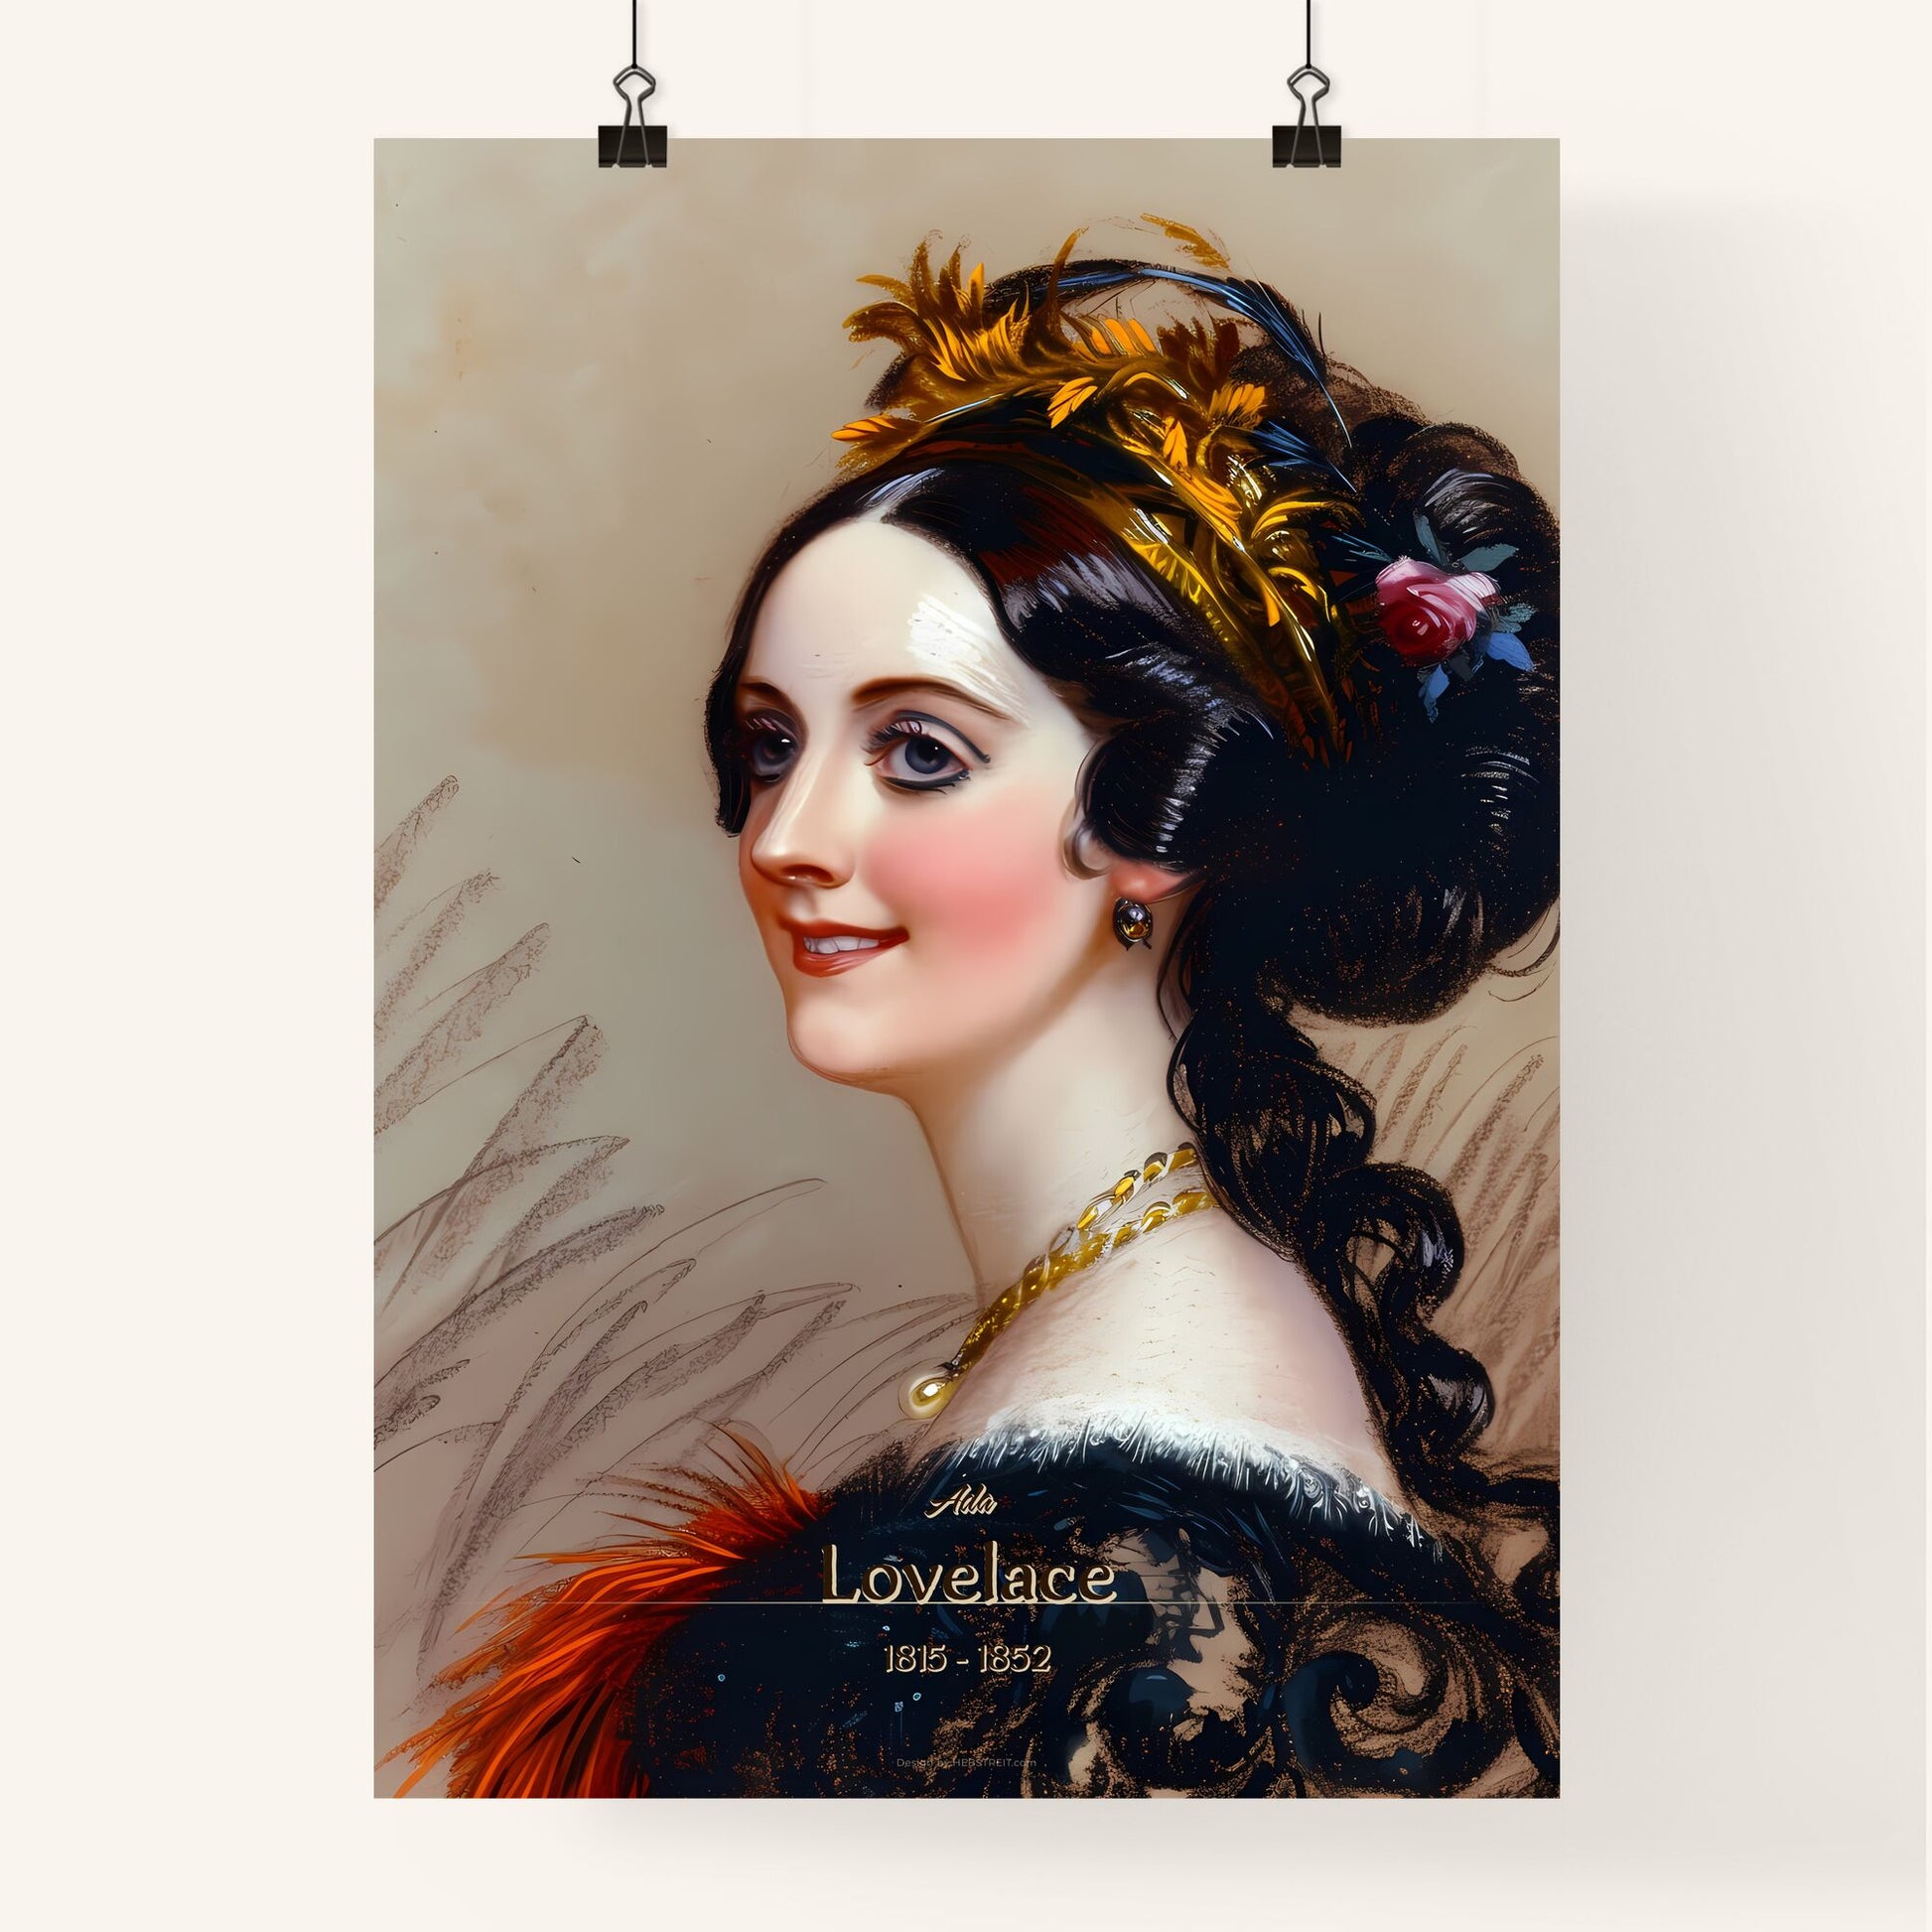 Ada, Lovelace, 1815 - 1852, A Poster of a woman with a feathered headdress Default Title